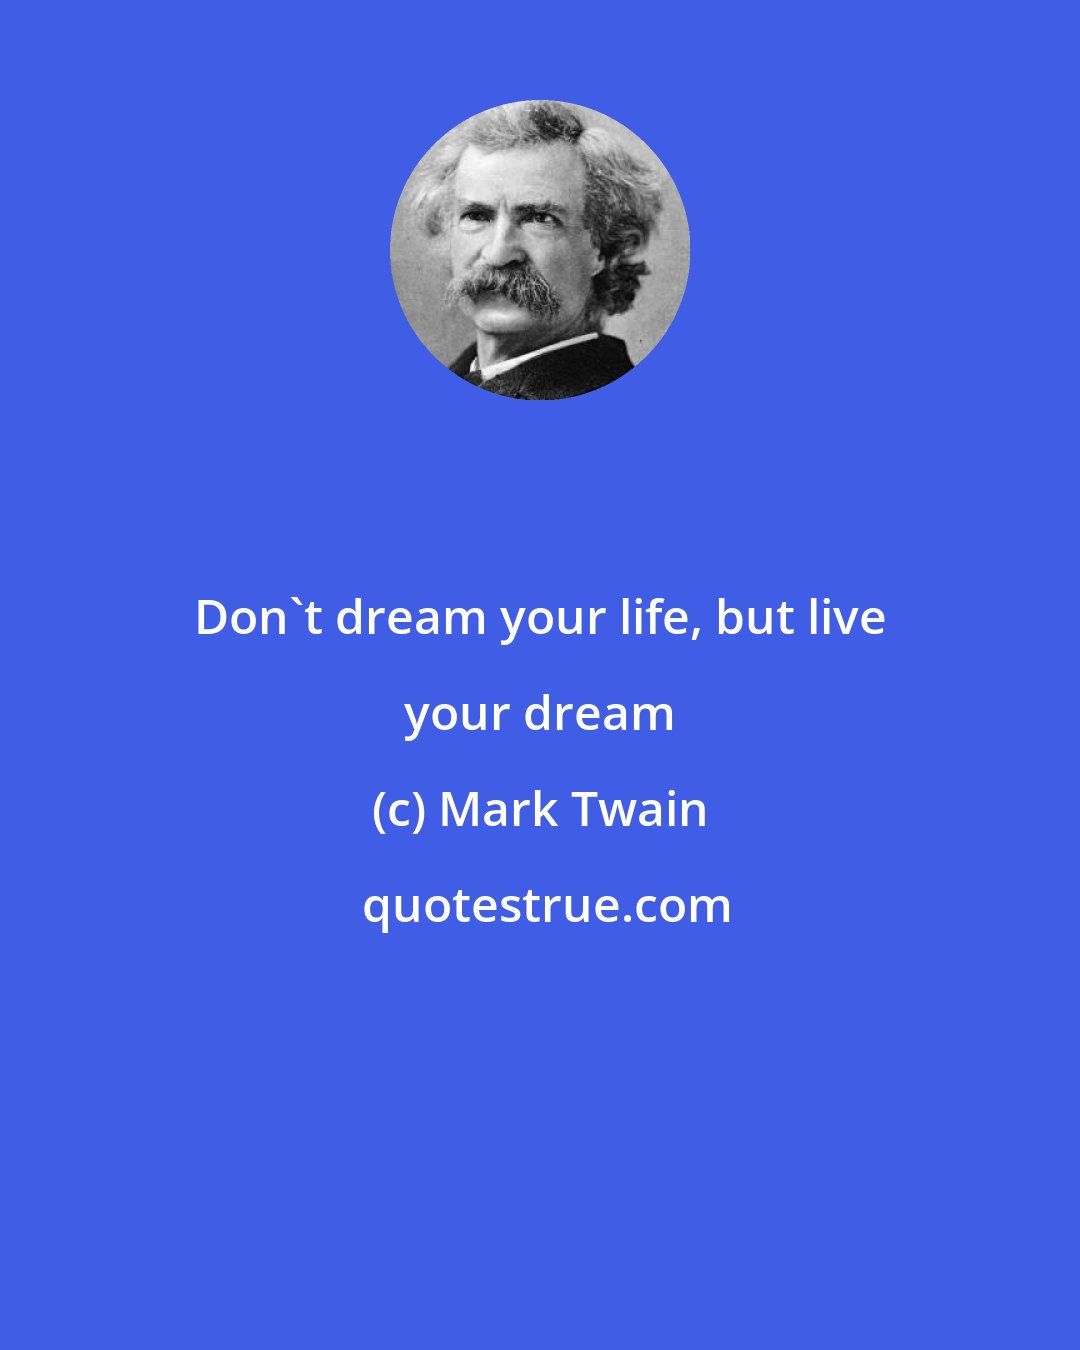 Mark Twain: Don't dream your life, but live your dream